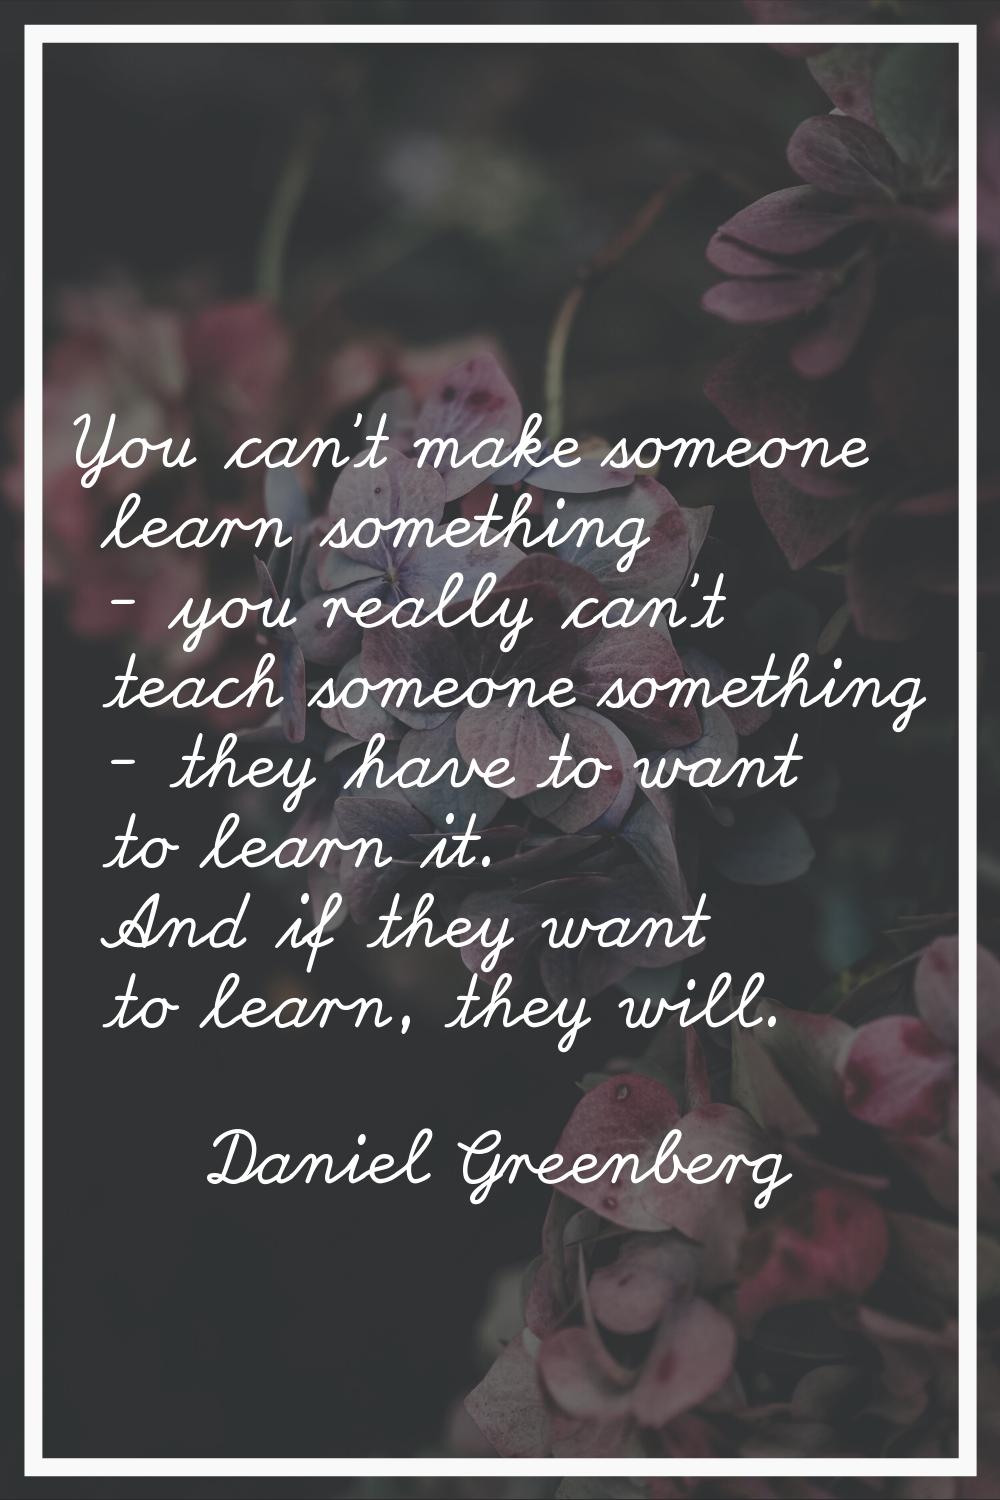 You can't make someone learn something - you really can't teach someone something - they have to wa